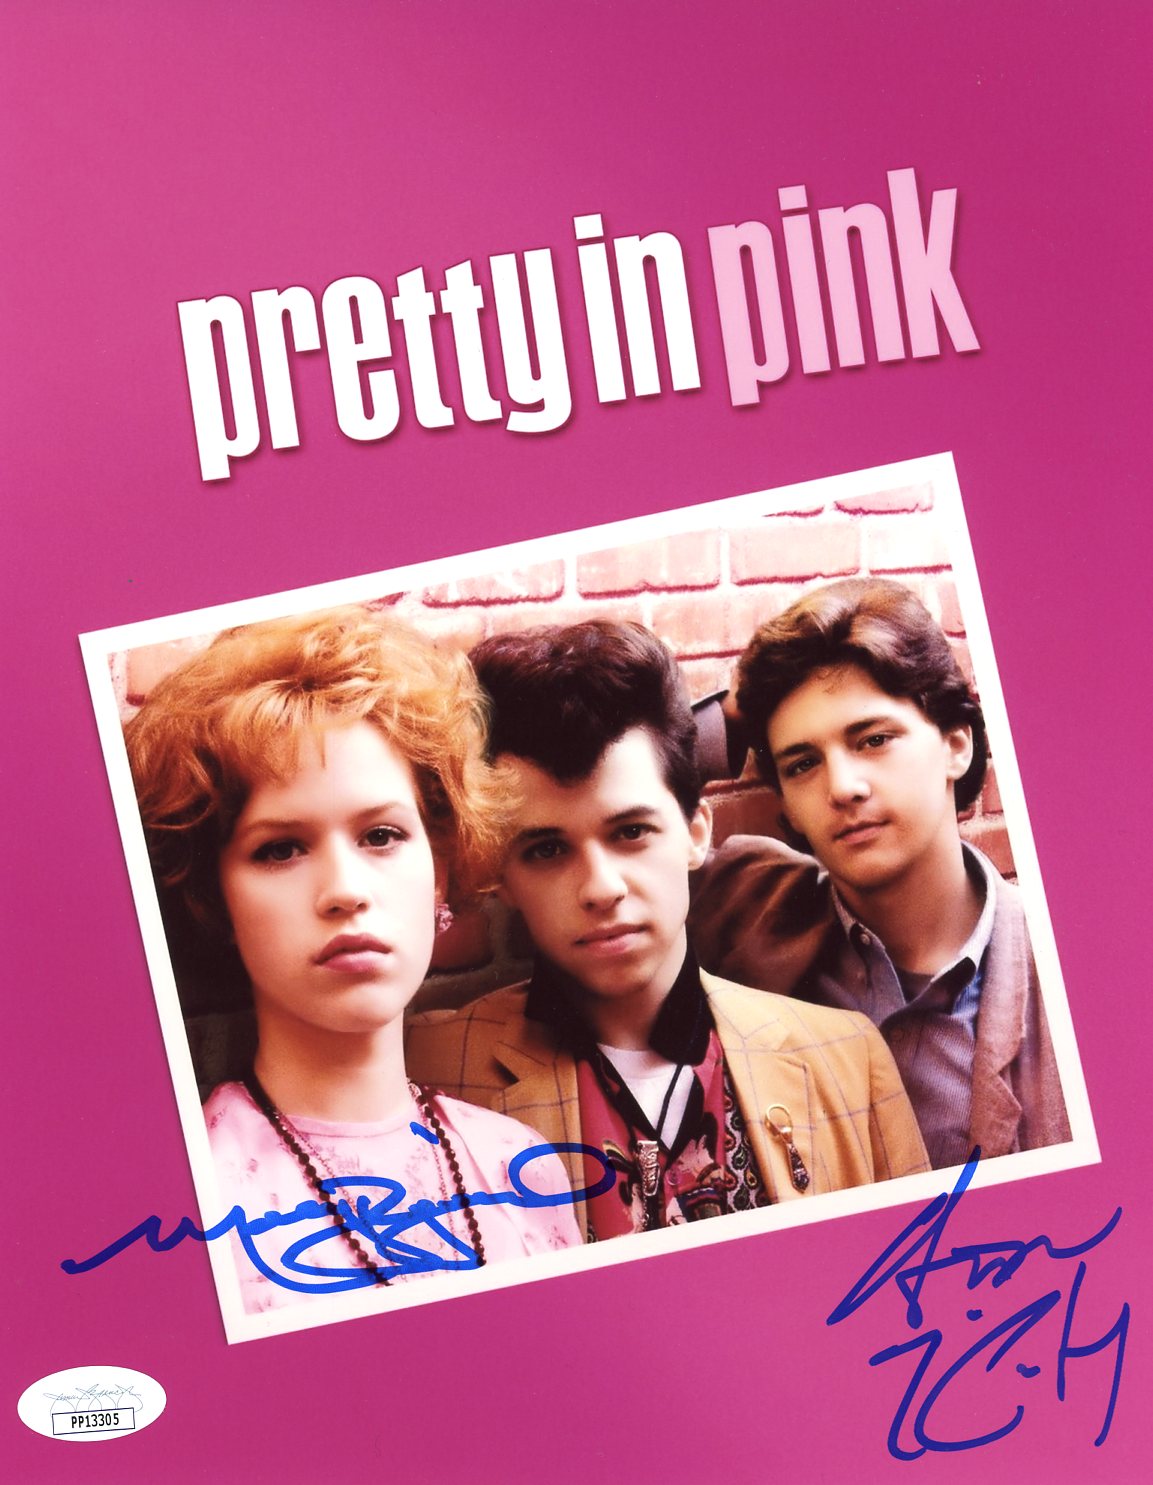 Pretty in Pink 8x10 Photo Cast x2 Signed McCarthy, Ringwald JSA Certified Autograph